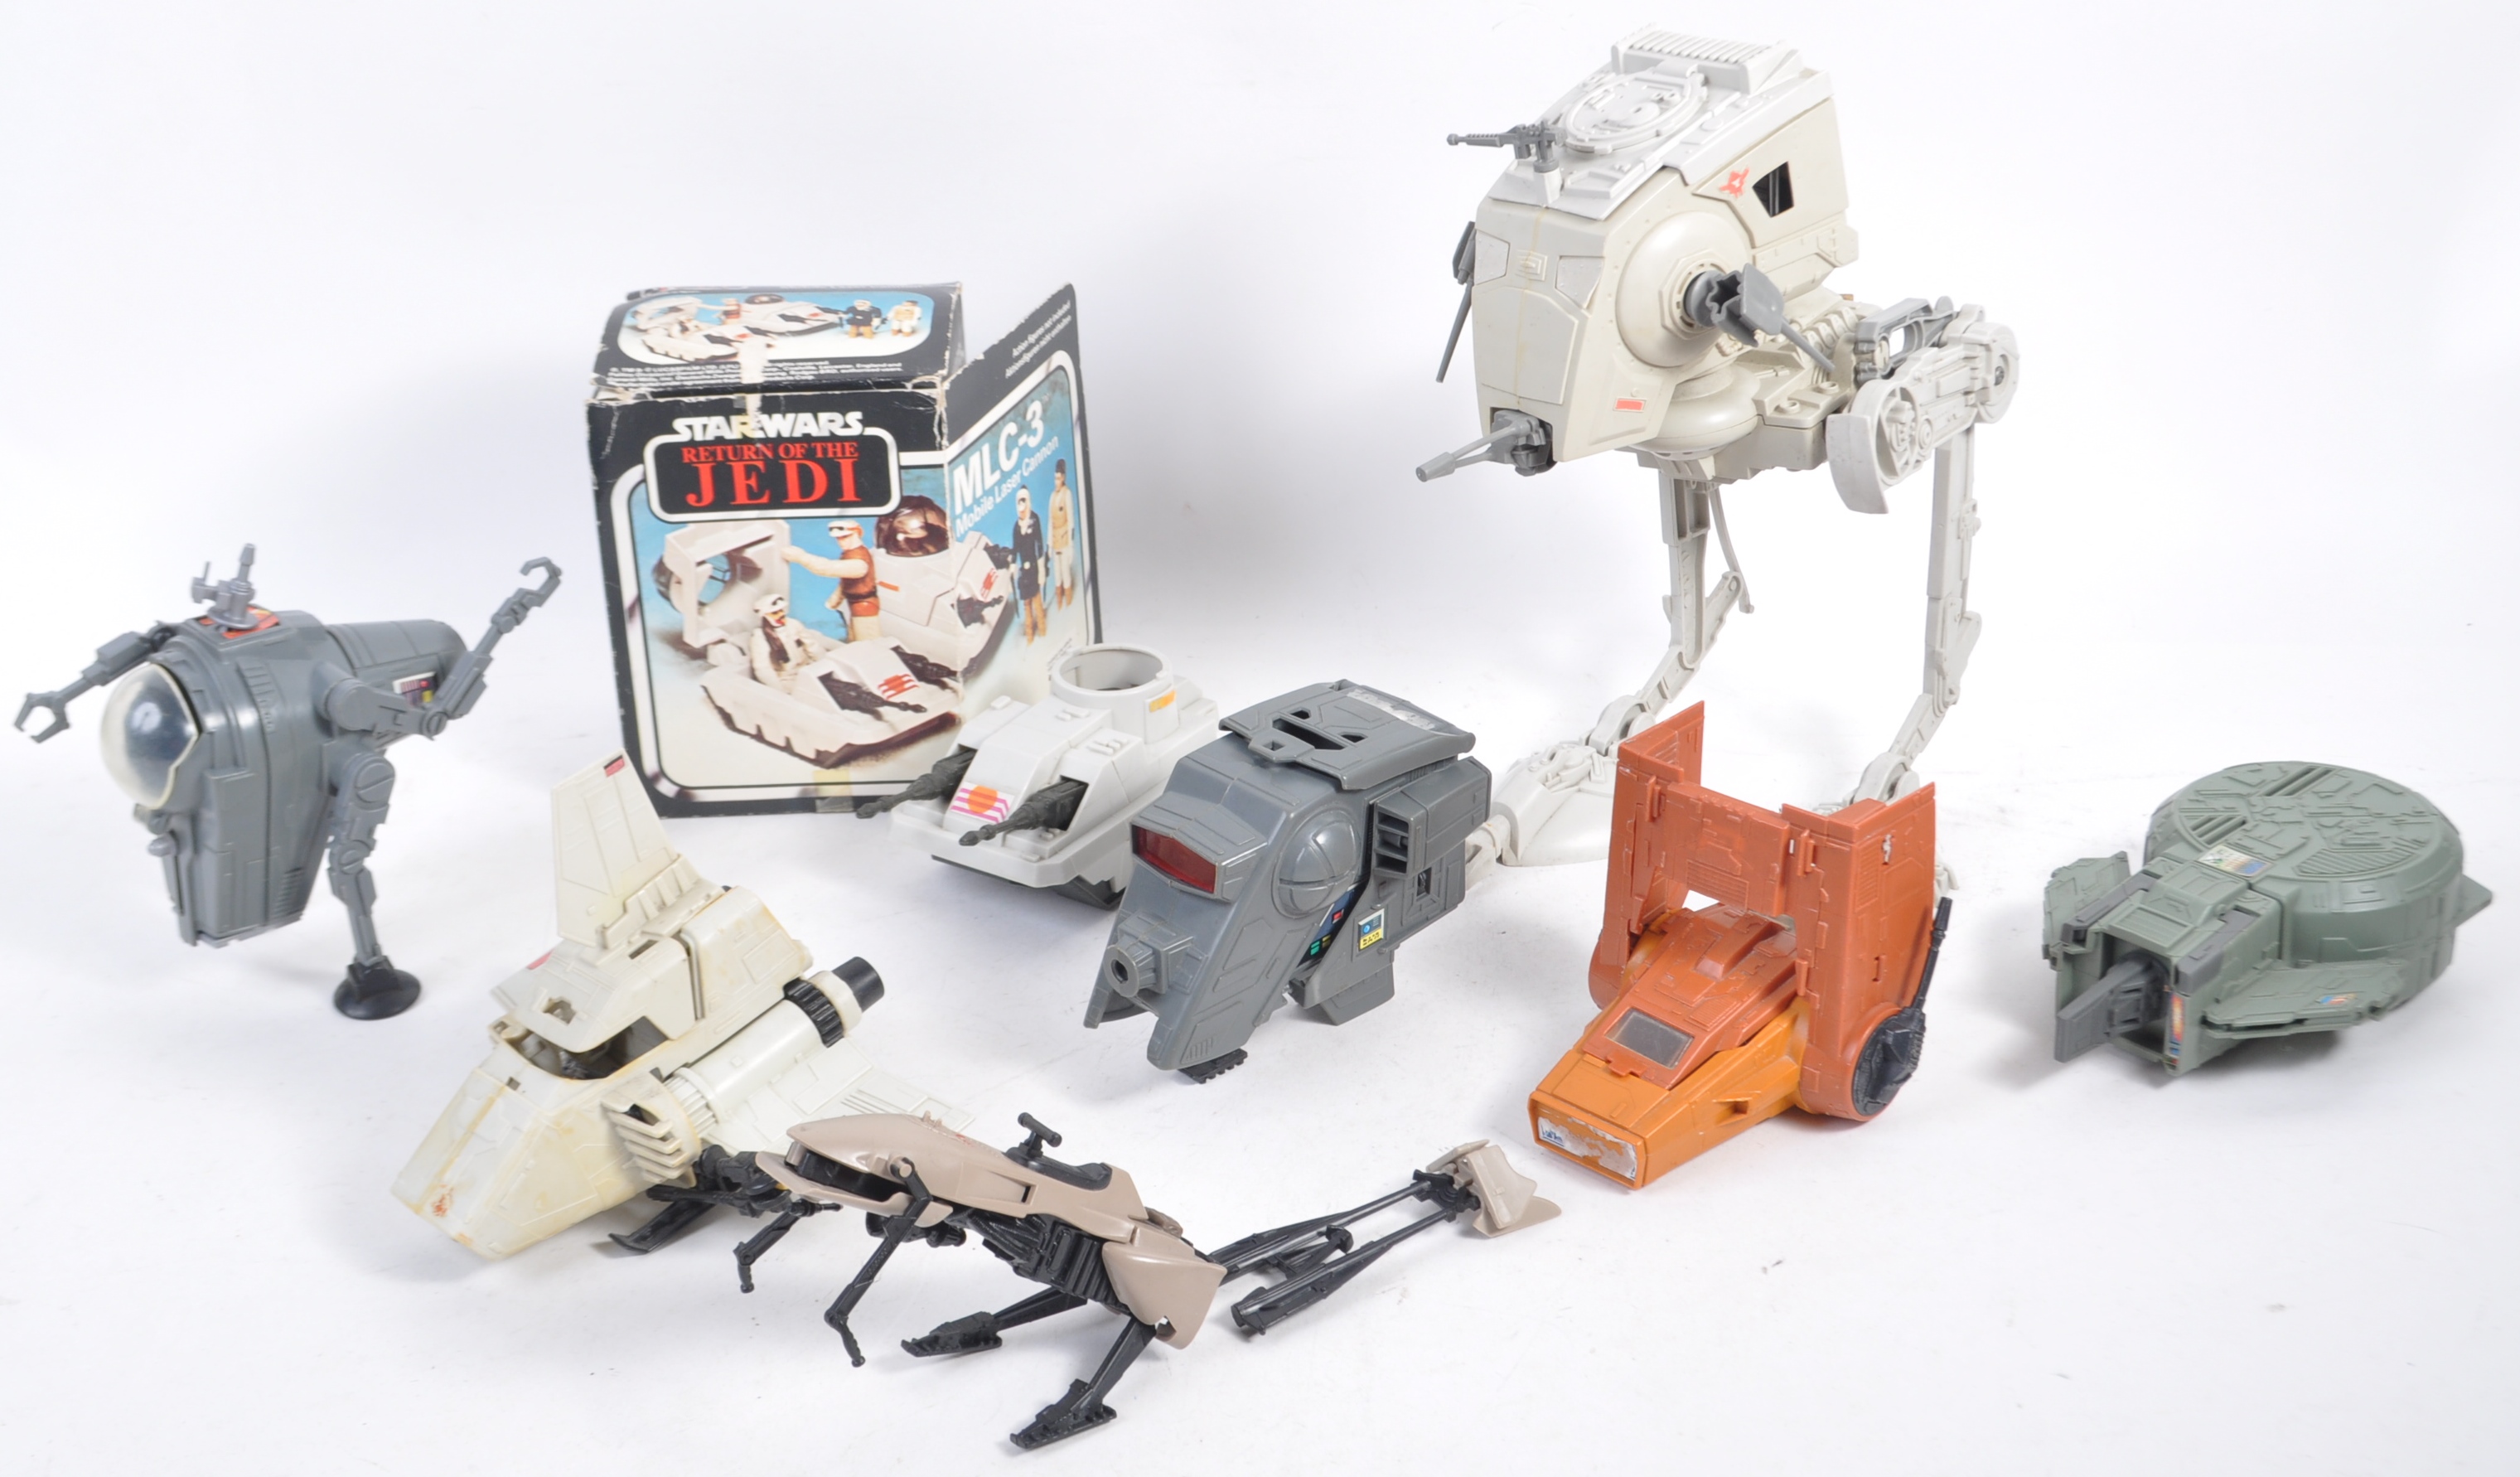 COLLECTION OF VINTAGE PALITOY STAR WARS PLAYSET MINIRIGS